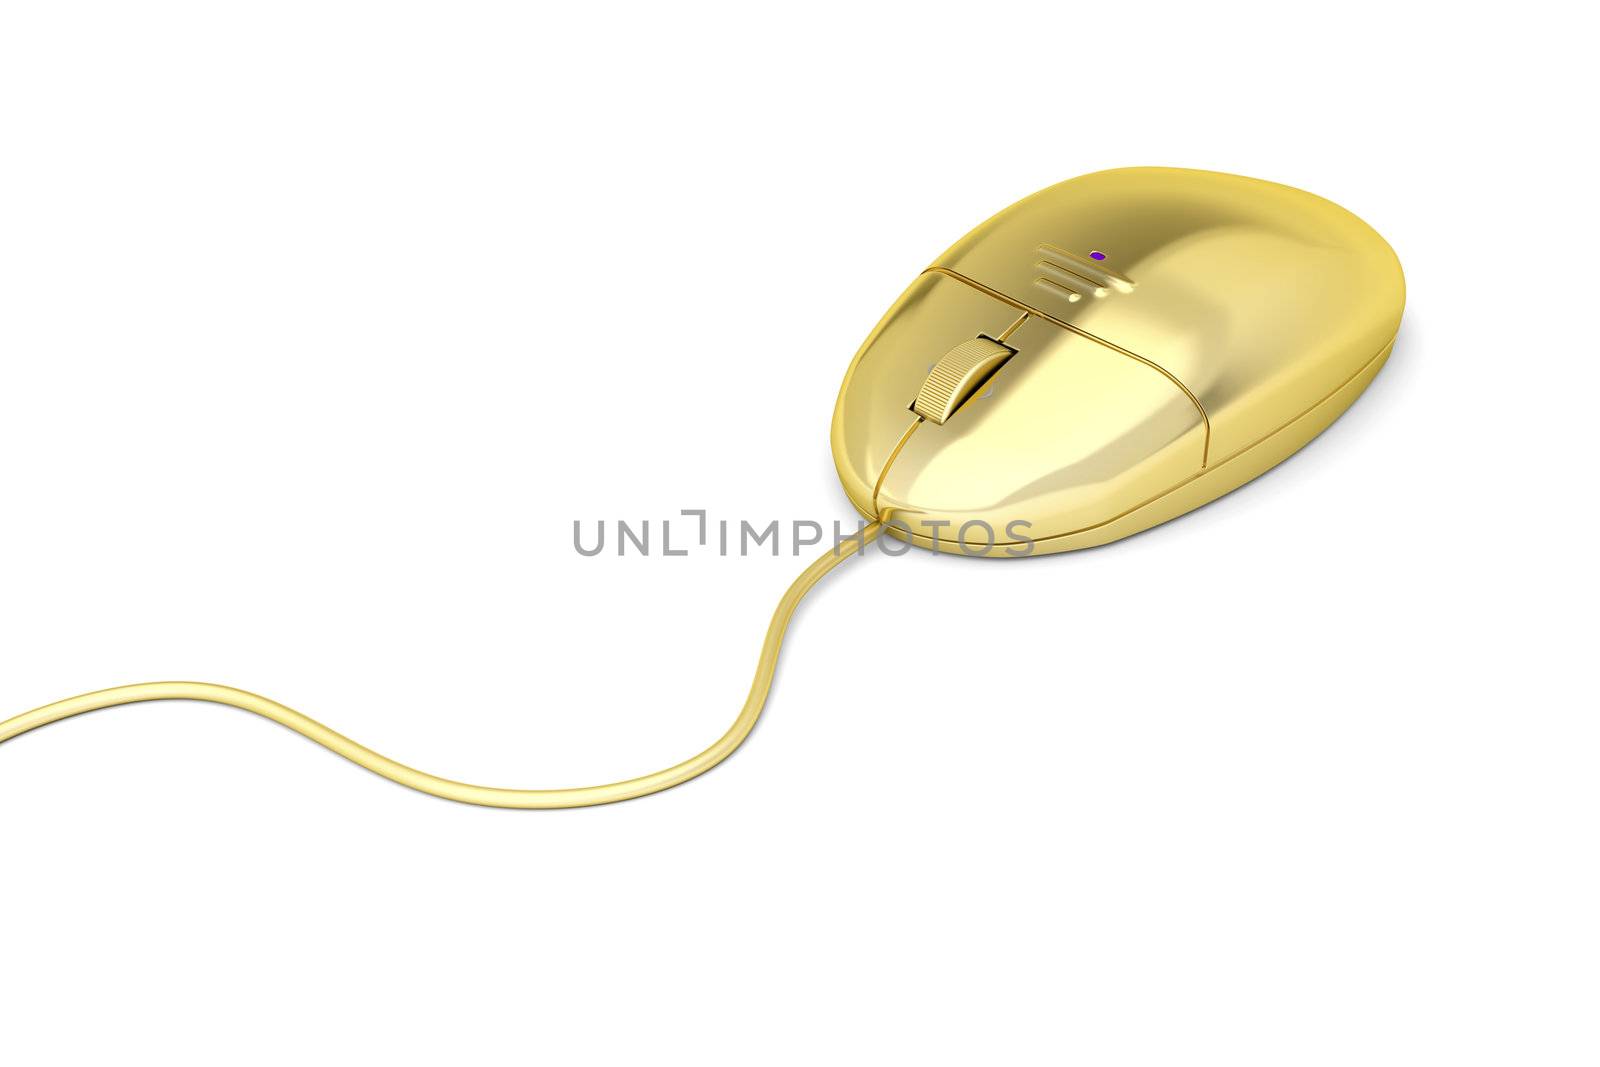 Golden computer mouse on white